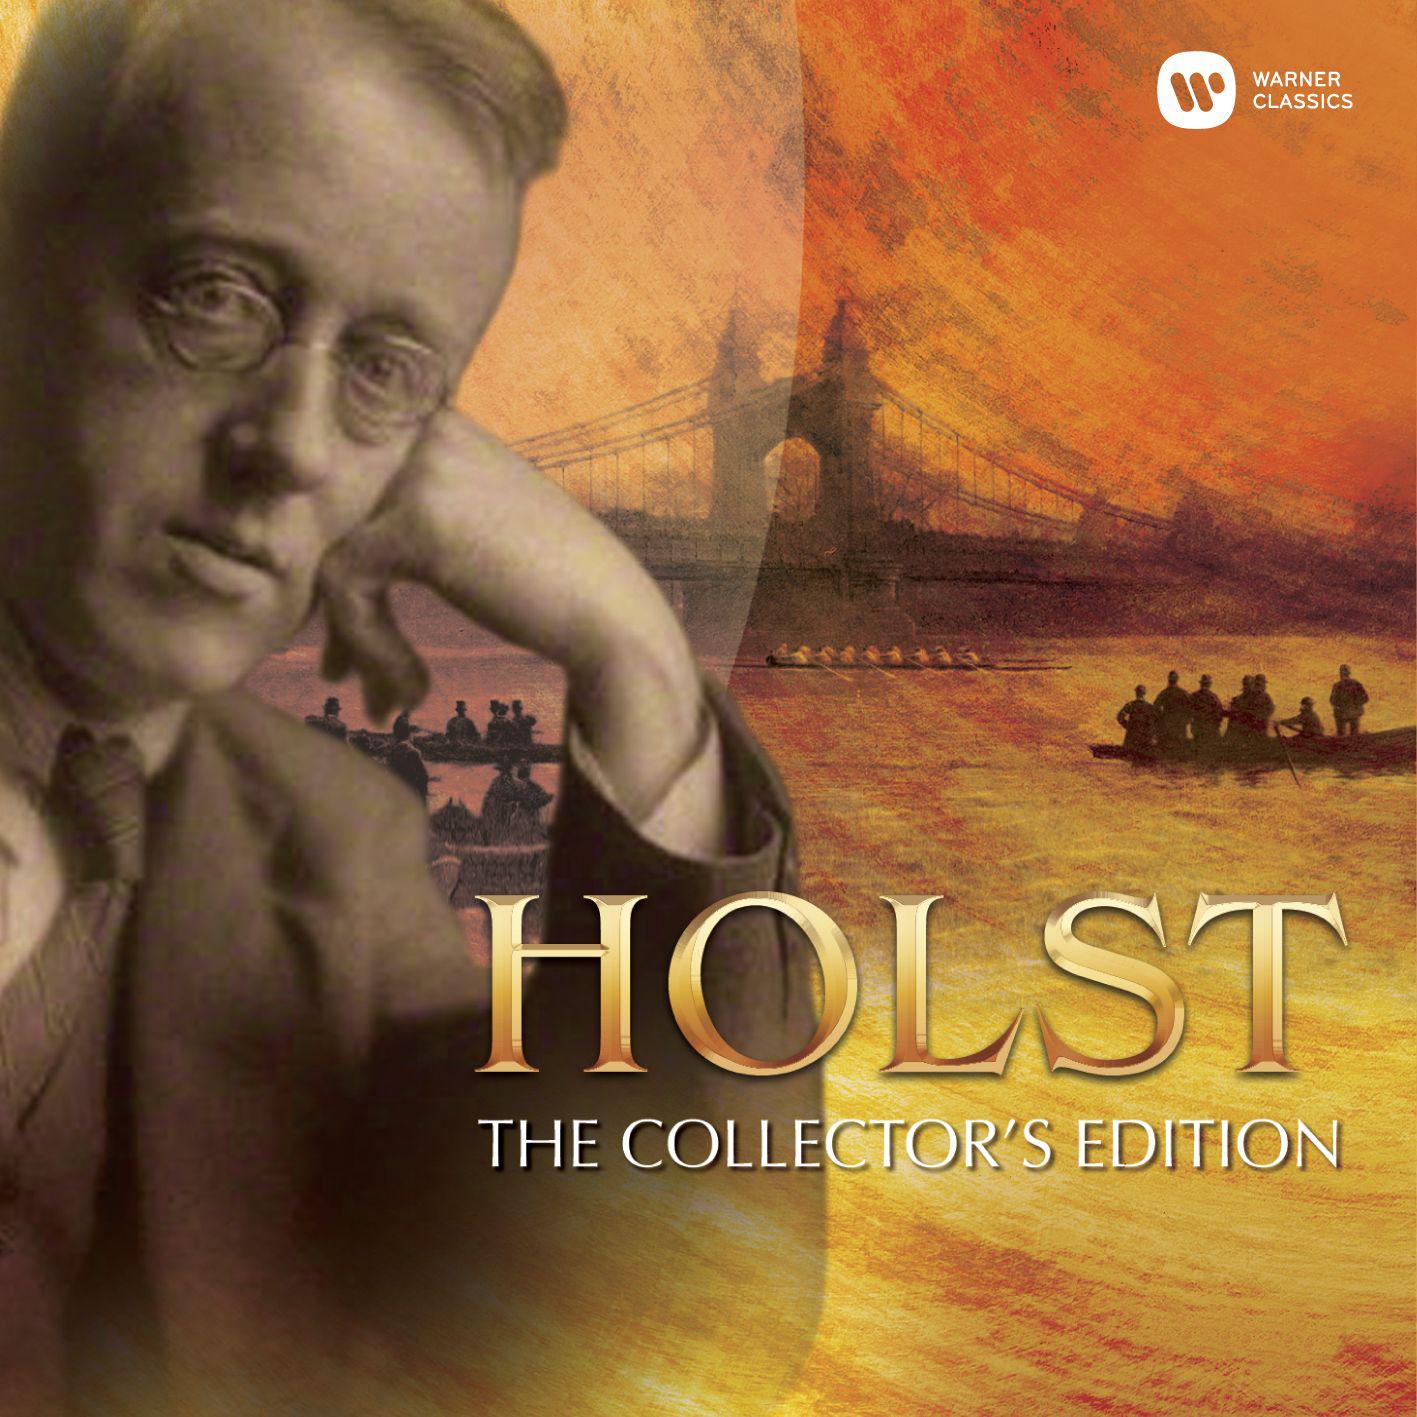 Holst: The Collector's Edition